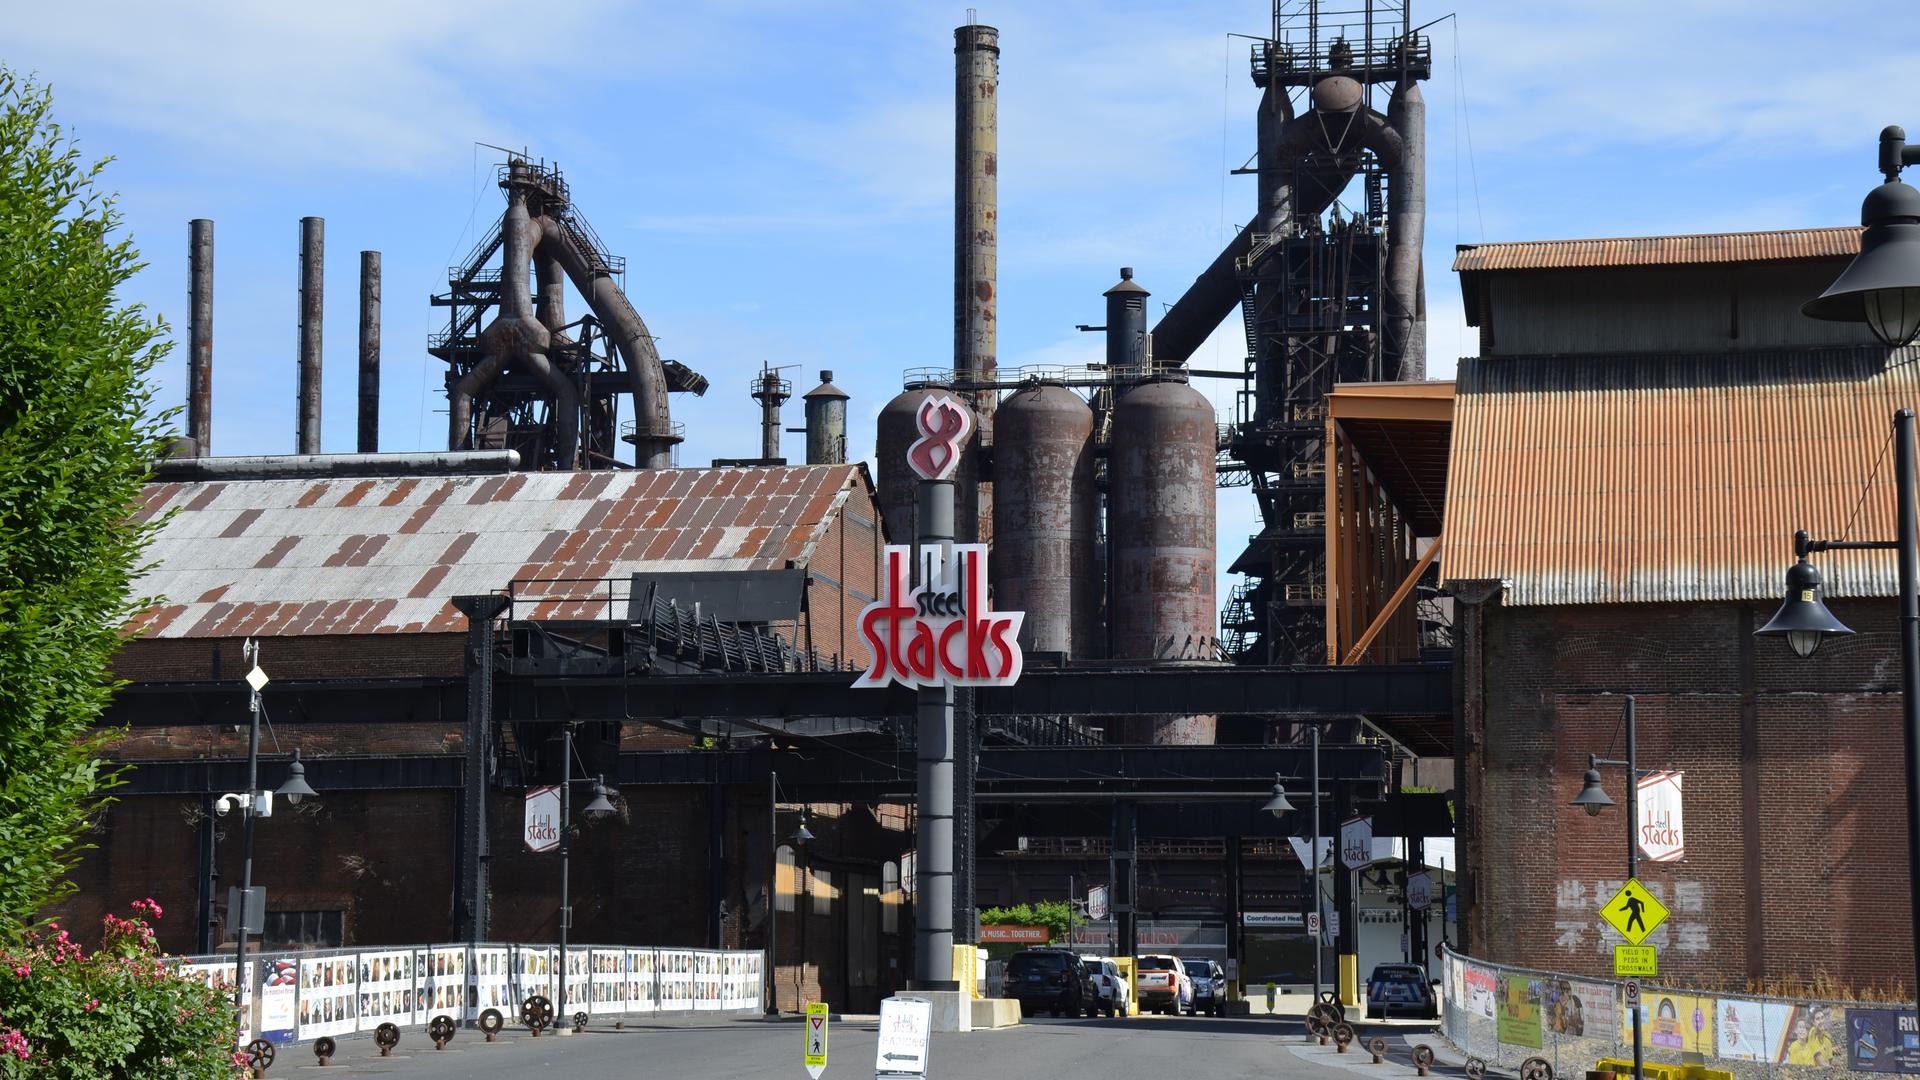 An old building with large mechanical infrastructure now sports a sign reading "SteelStacks" and is a now an entertainment venue. 